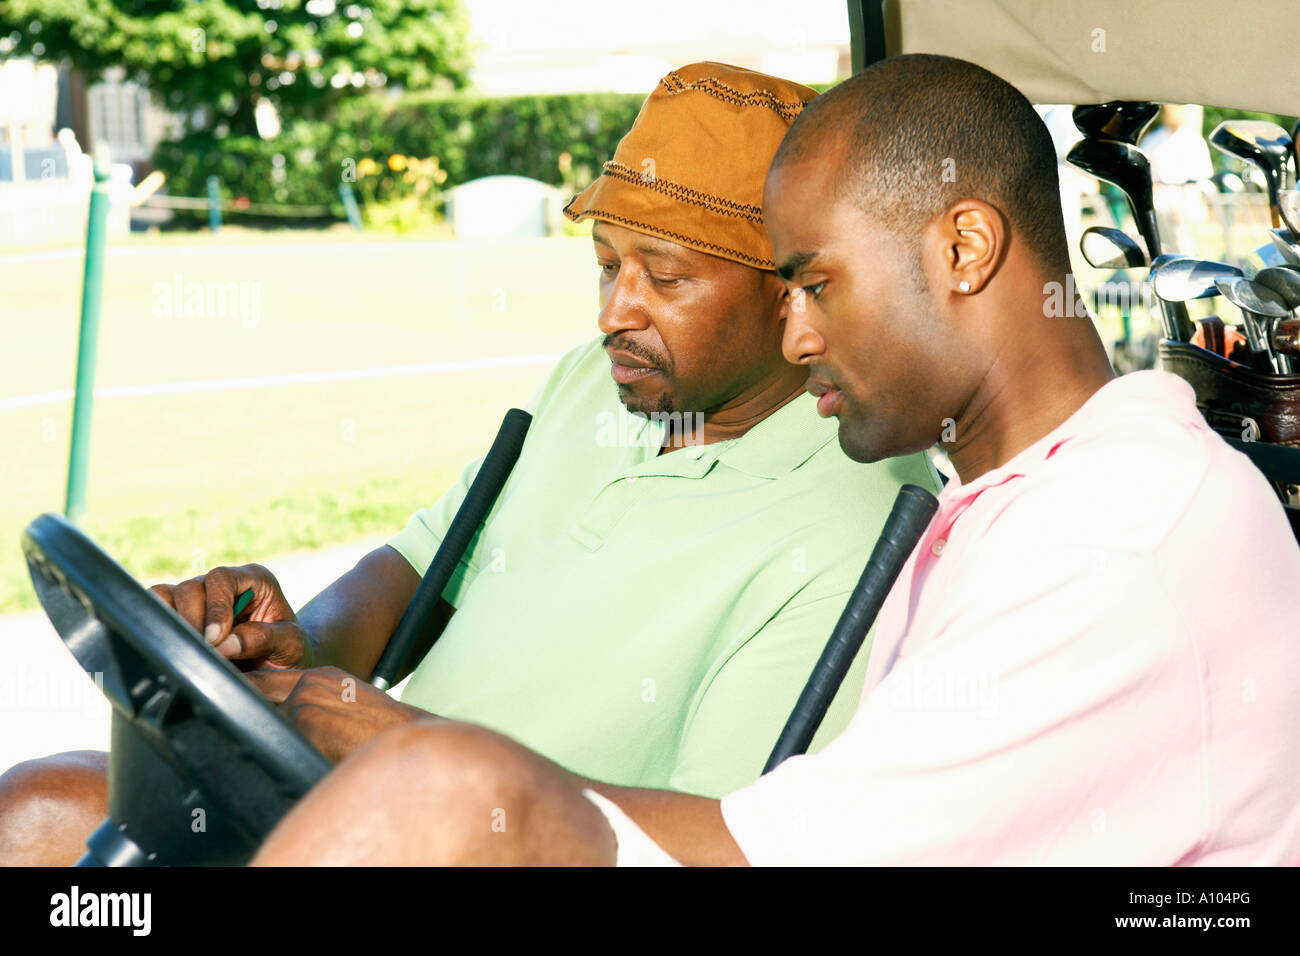 African men keeping score of their golf game Stock Photo